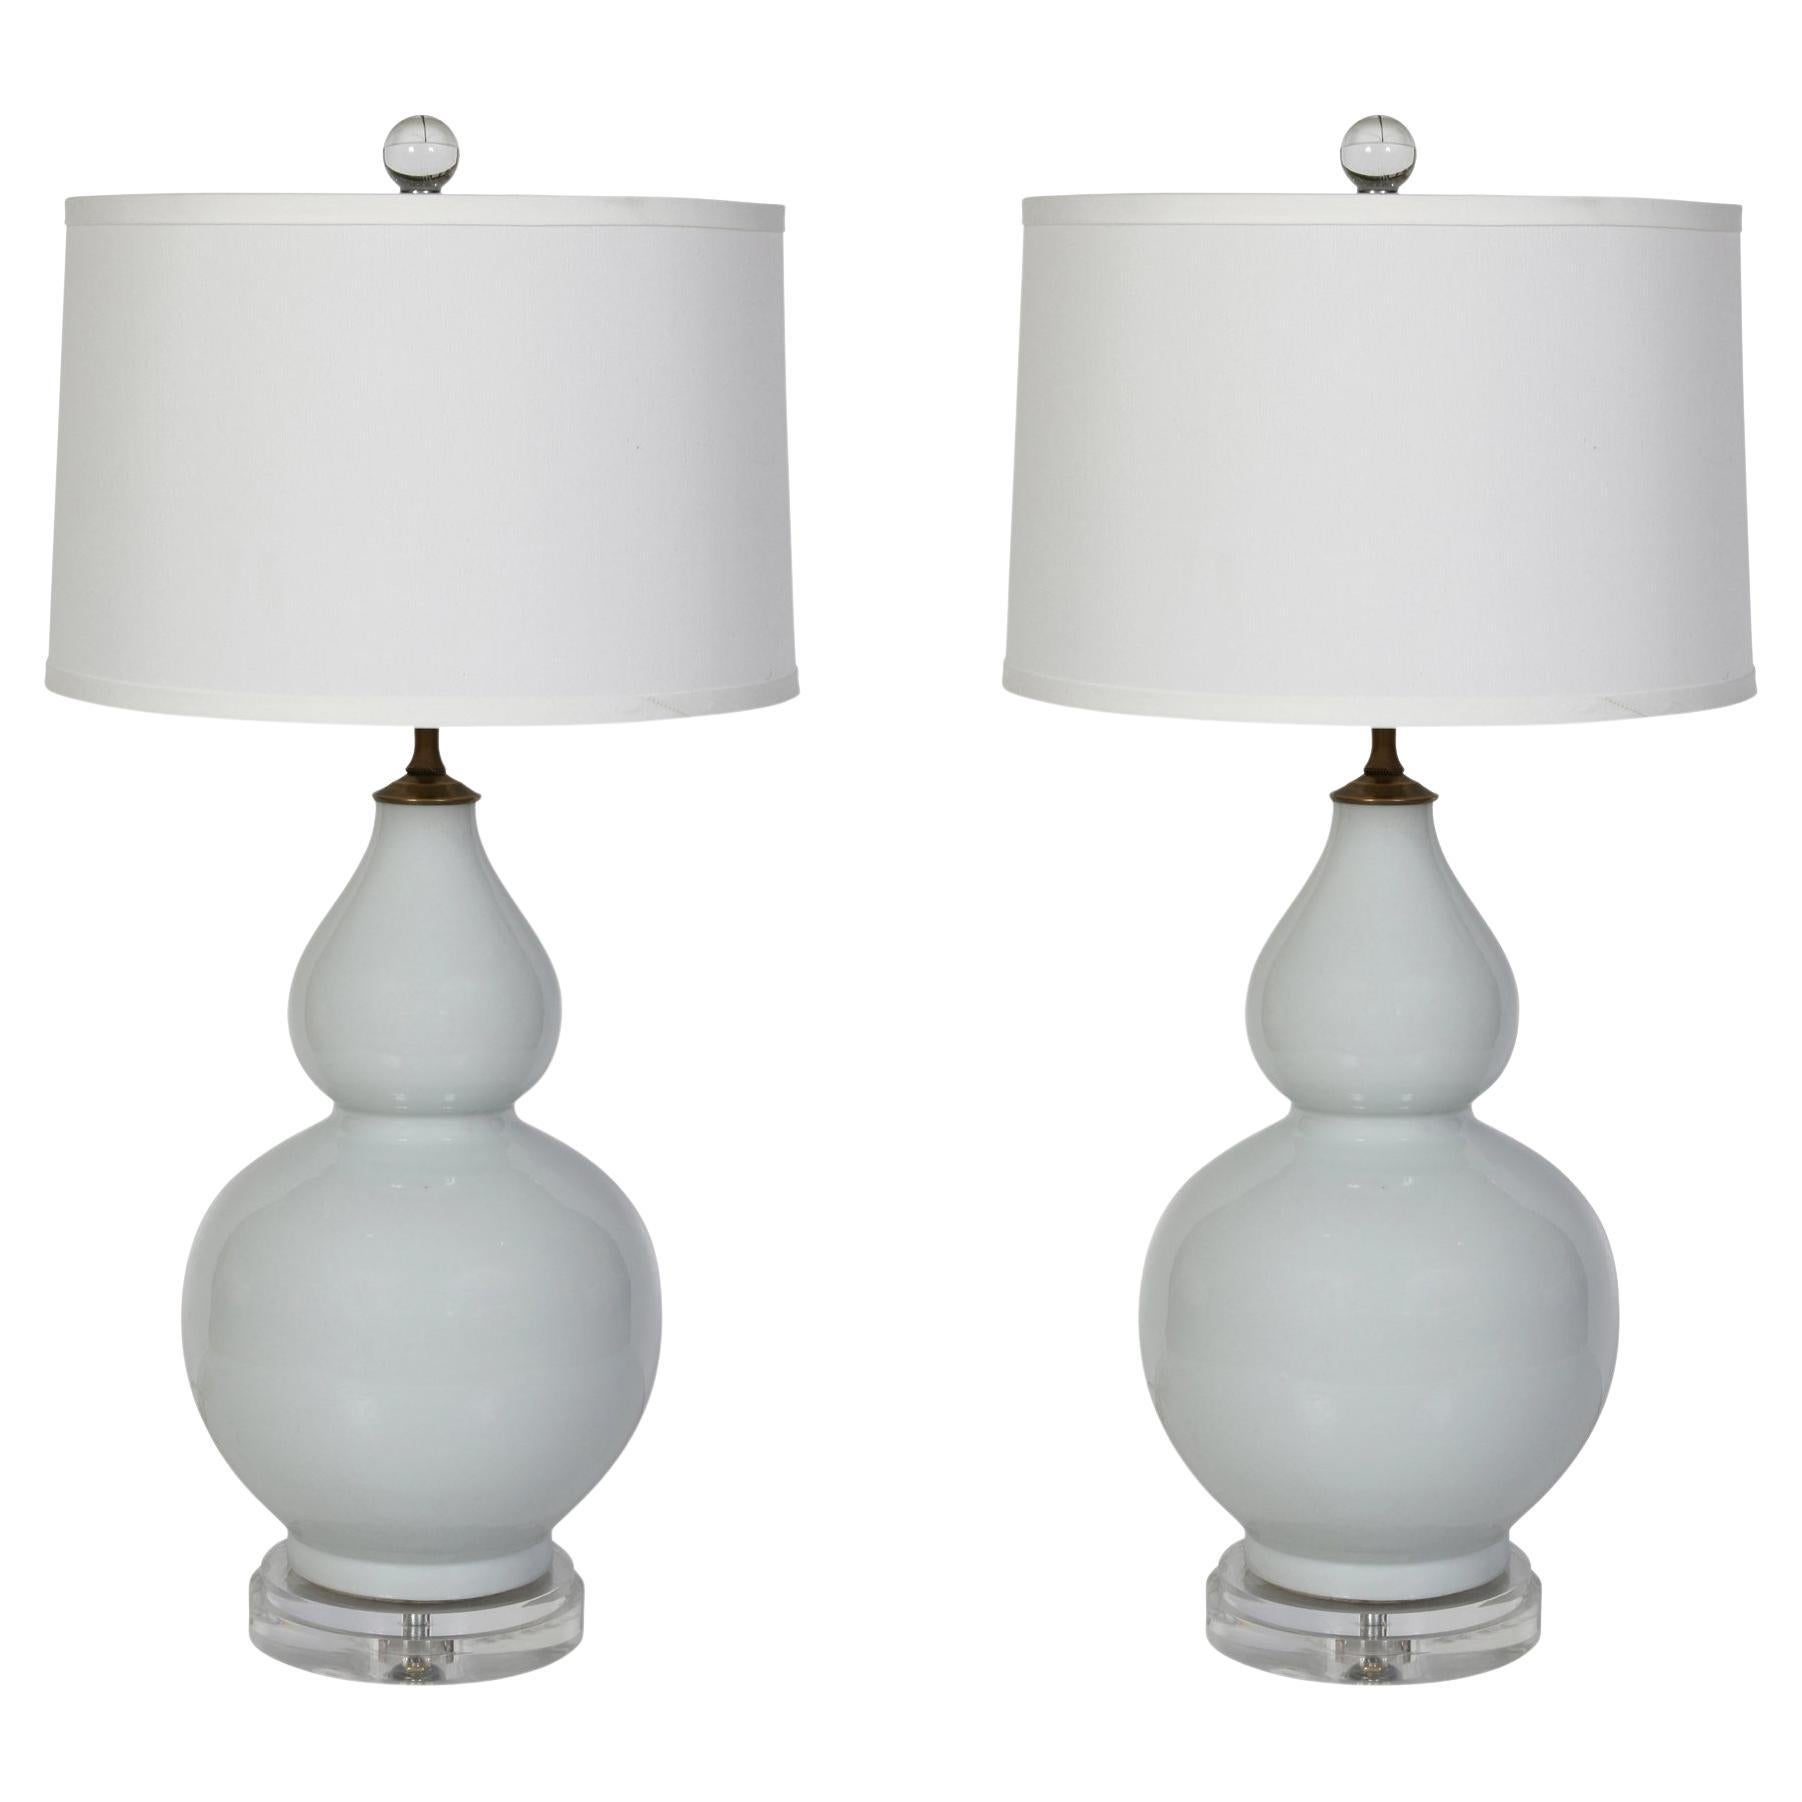 A Pair of Double Gourd Gray Ceramic Lamps on Lucite Base For Sale